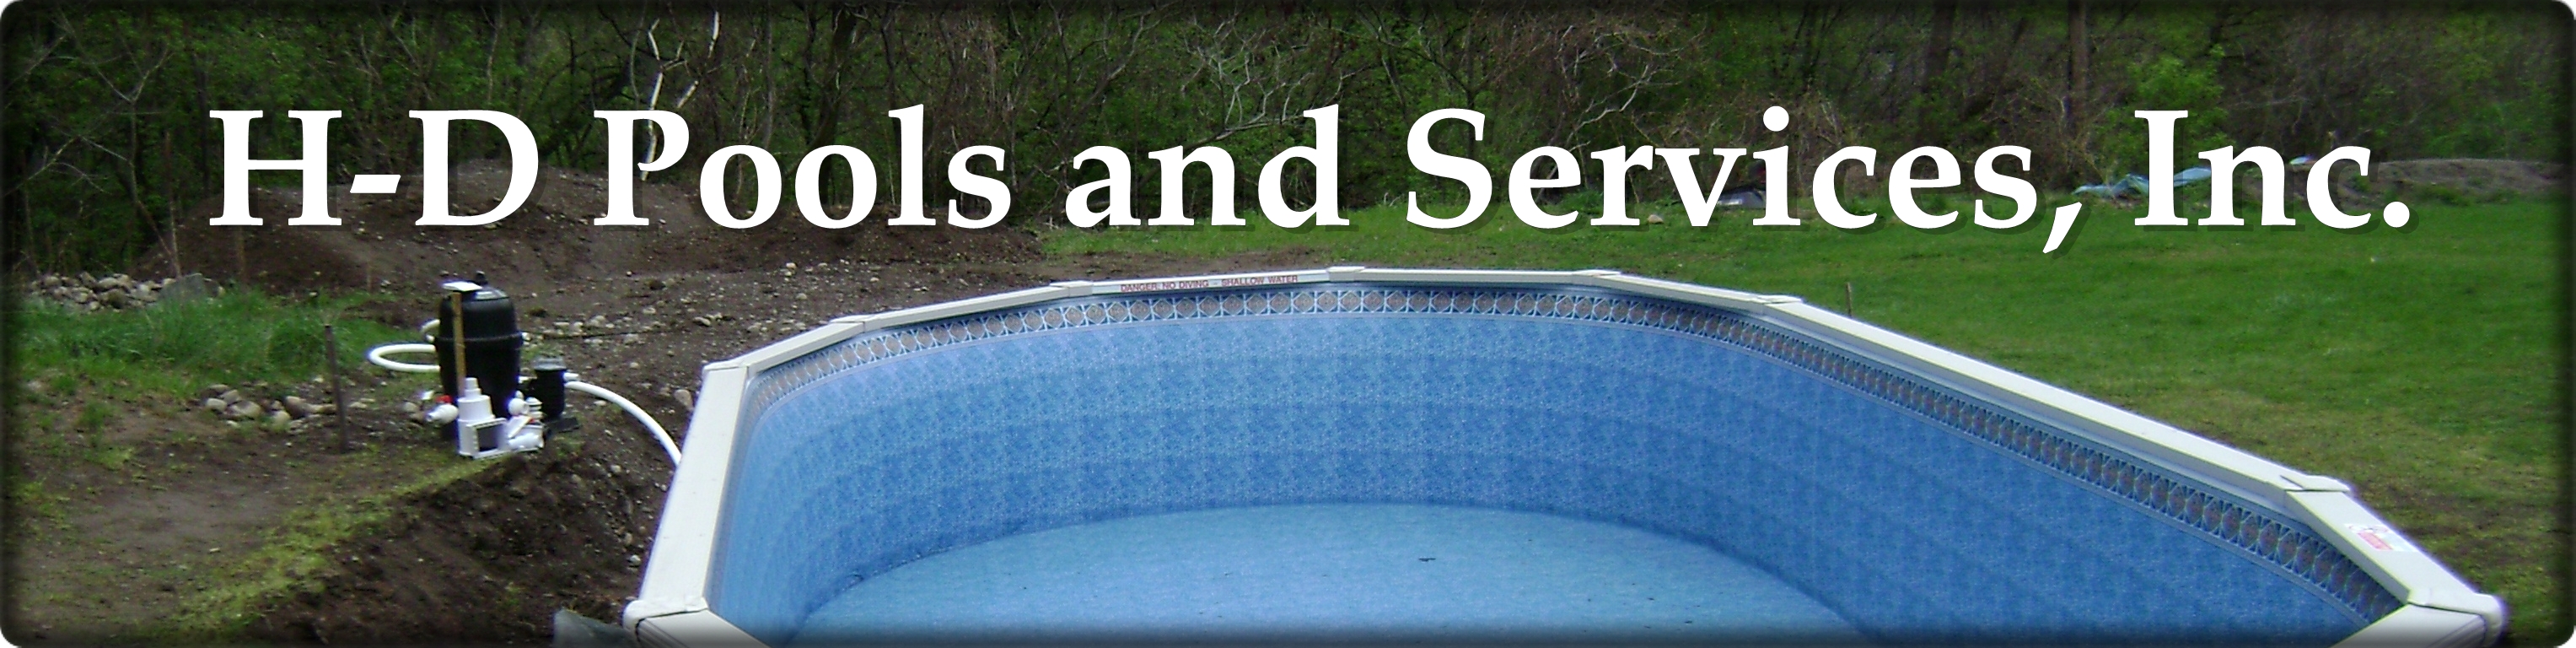 H-D Pools and Services, Inc.